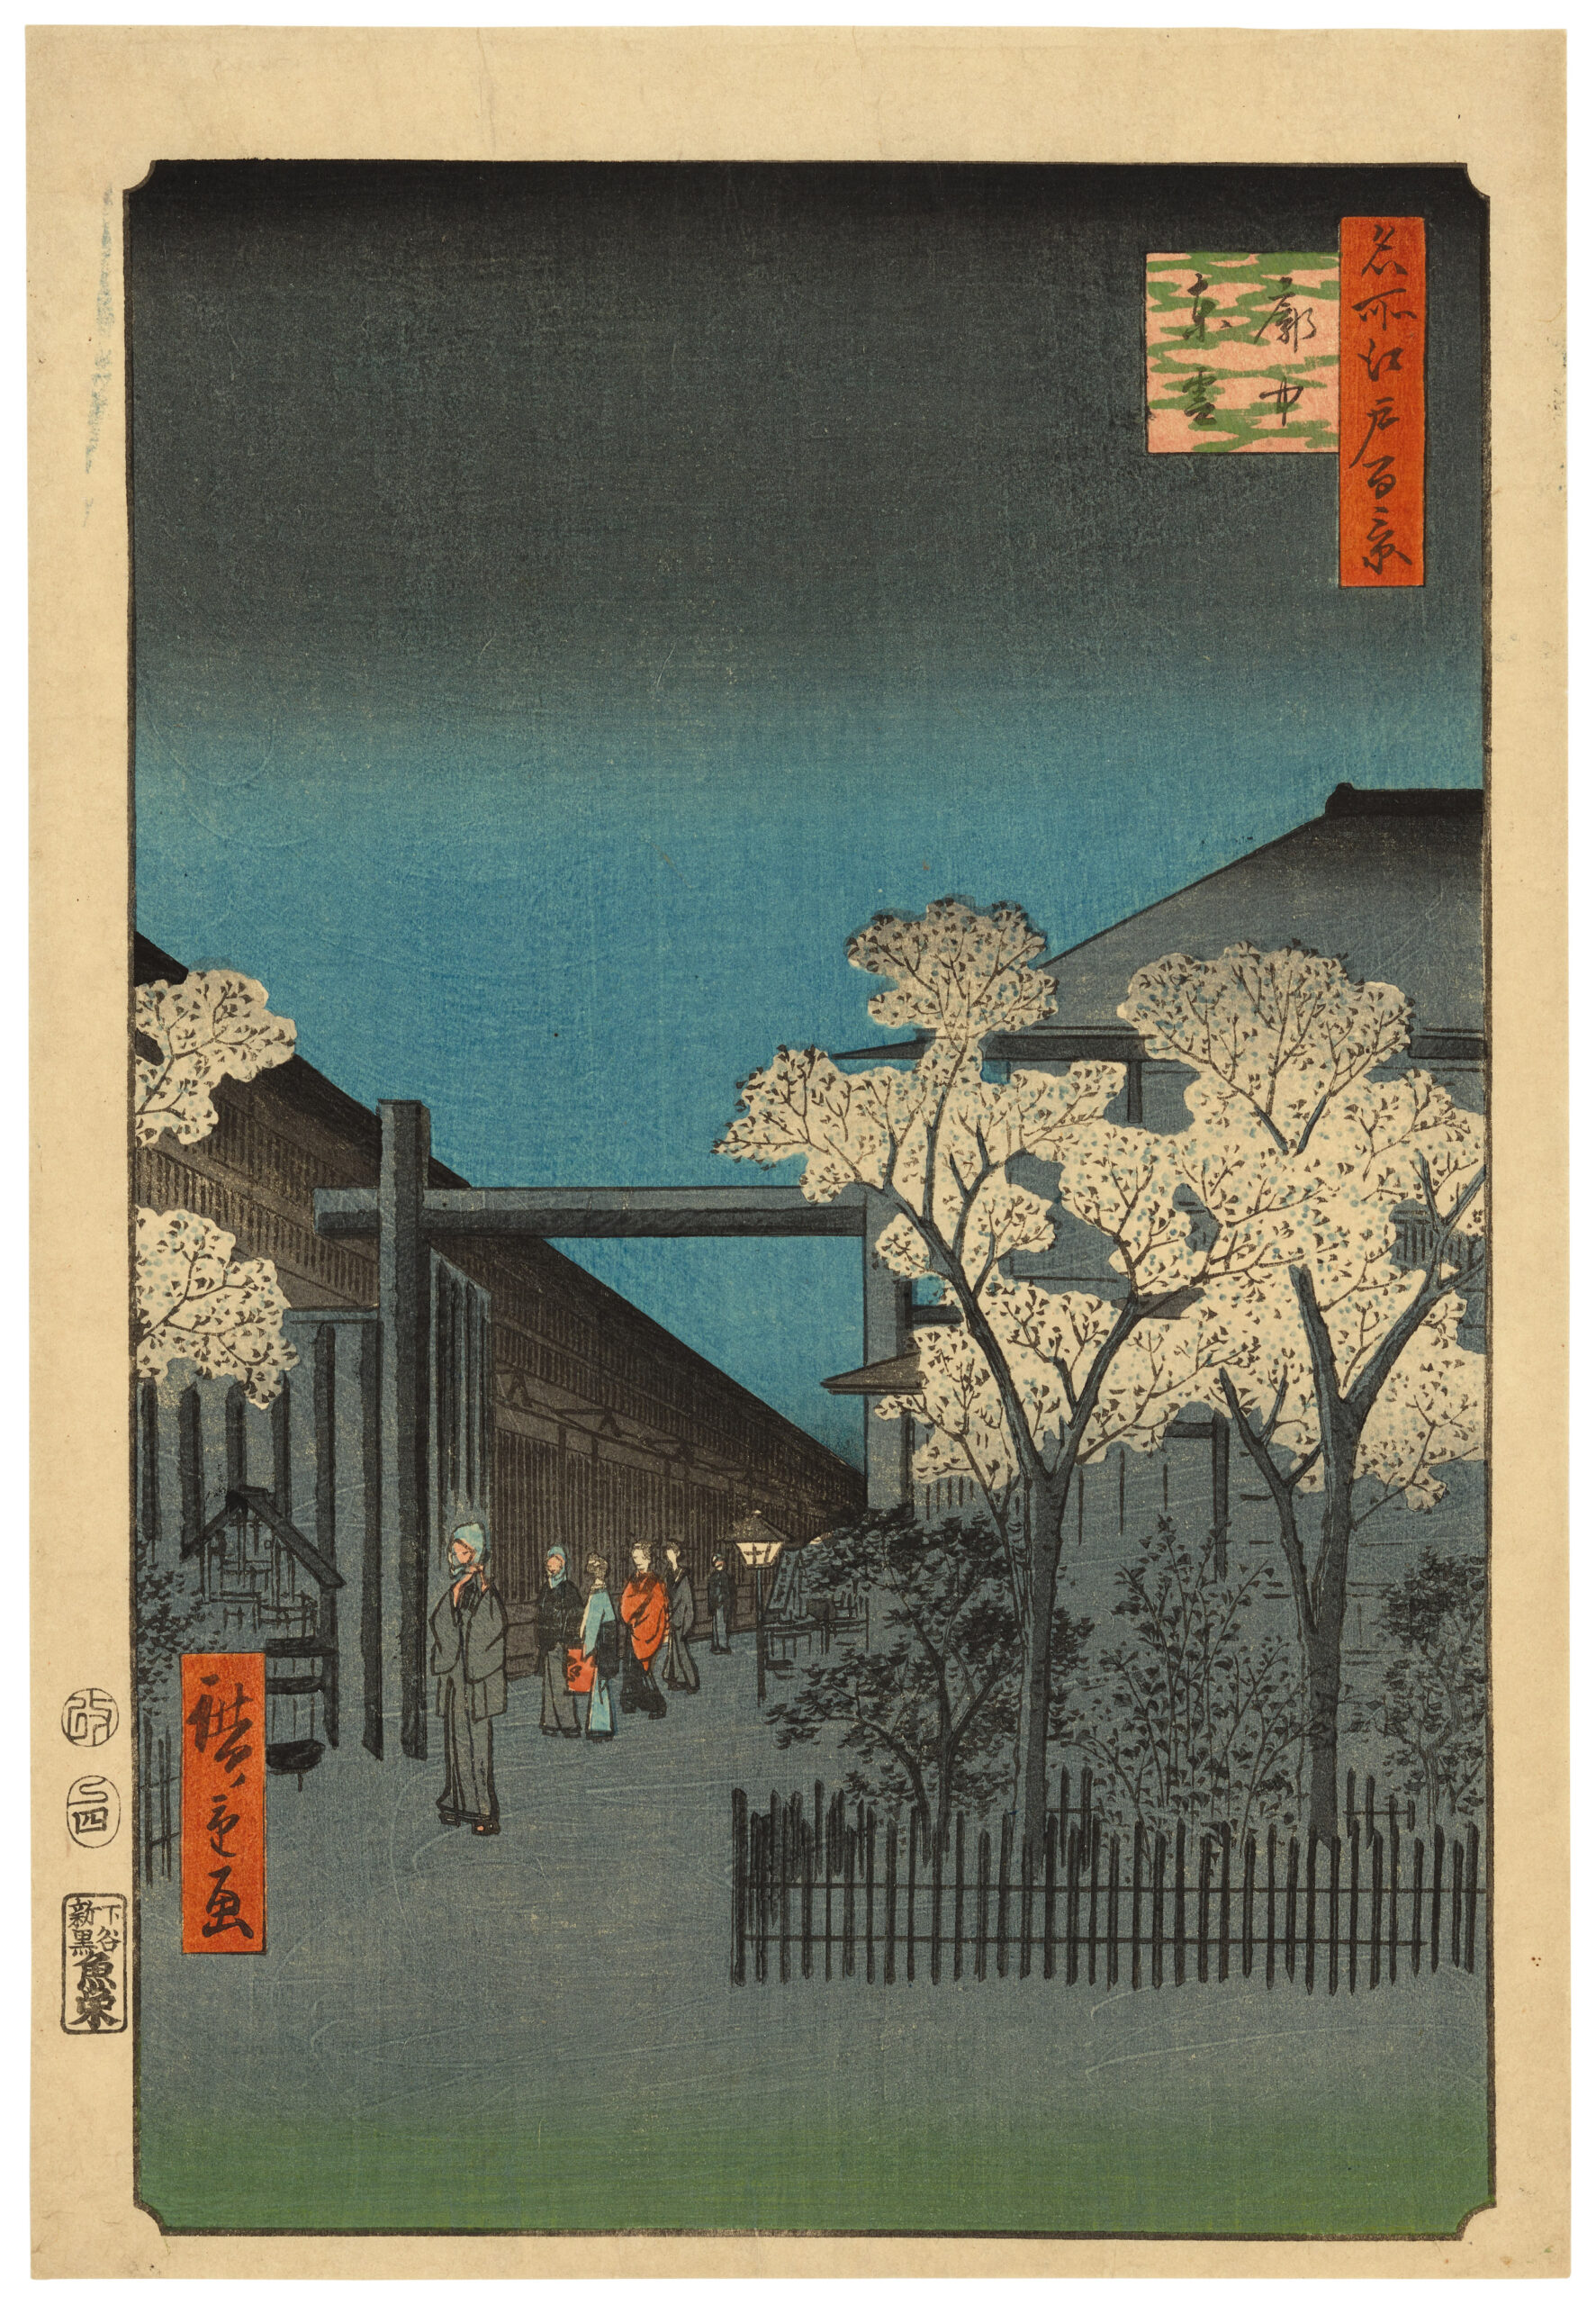 Utagawa Hiroshige (1797-1858), 'Dawn in the Yoshiwara', from the series 'One Hundred Famous Views of Edo', woodblock print, 1857, 4th month, 36.8 x 25.1cm.